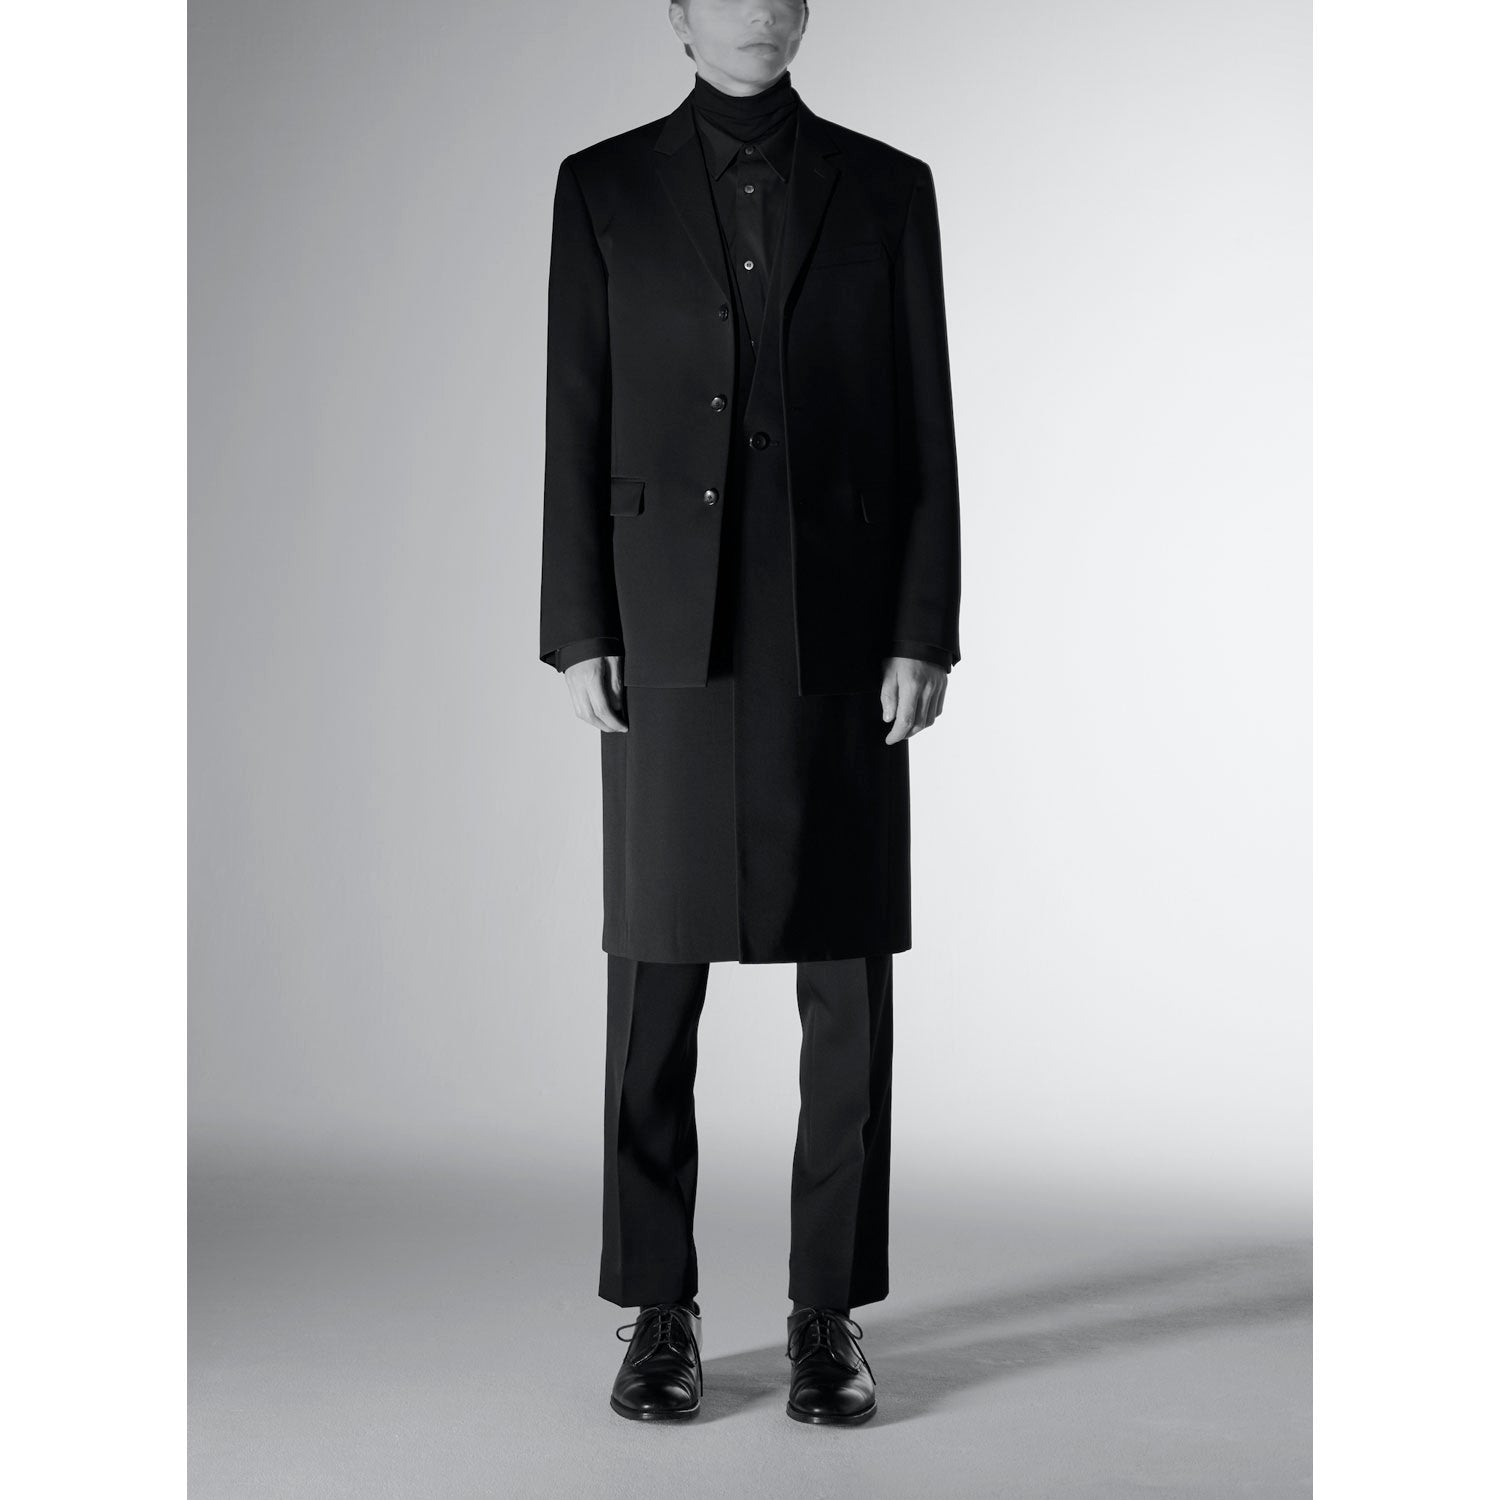 Single Jacket / black – th products